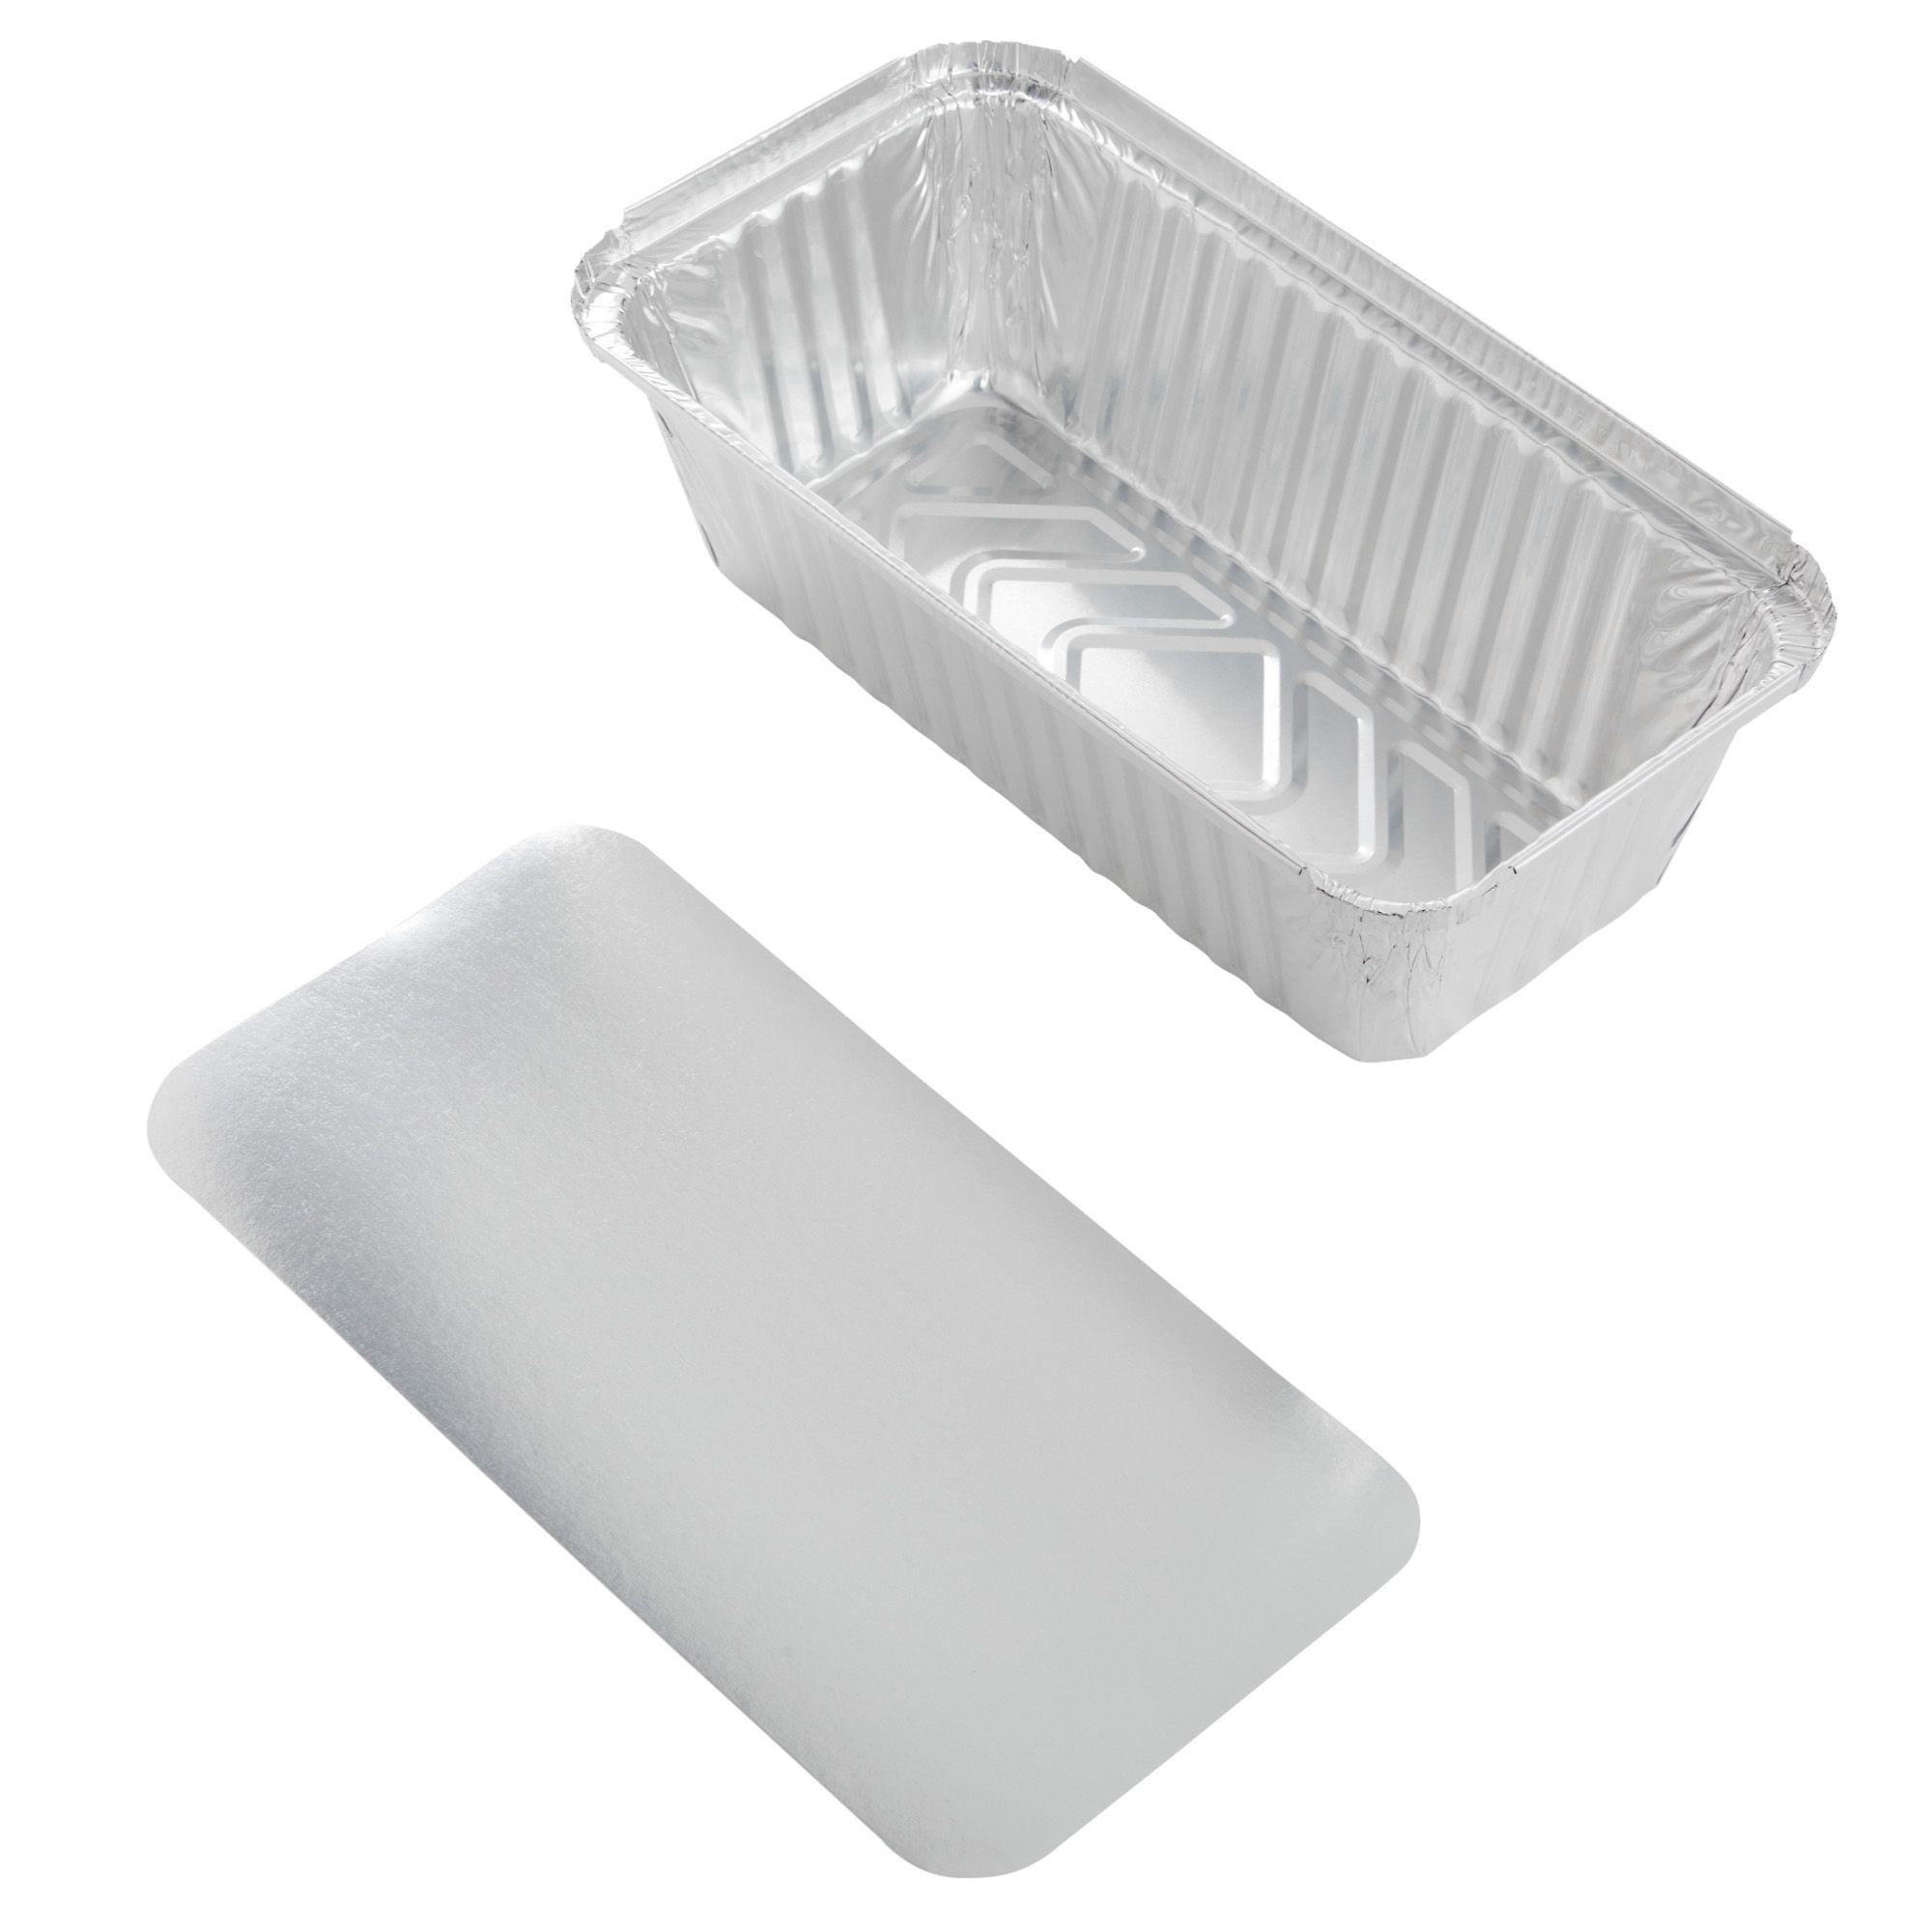 Stock Your Home 2 Lb Aluminum Foil Mini Loaf Pans (50 Pack) Disposable  Small Loaf Pan – 2 Pound Baking Tin Liners, Perfect to Bake Cakes, Bread